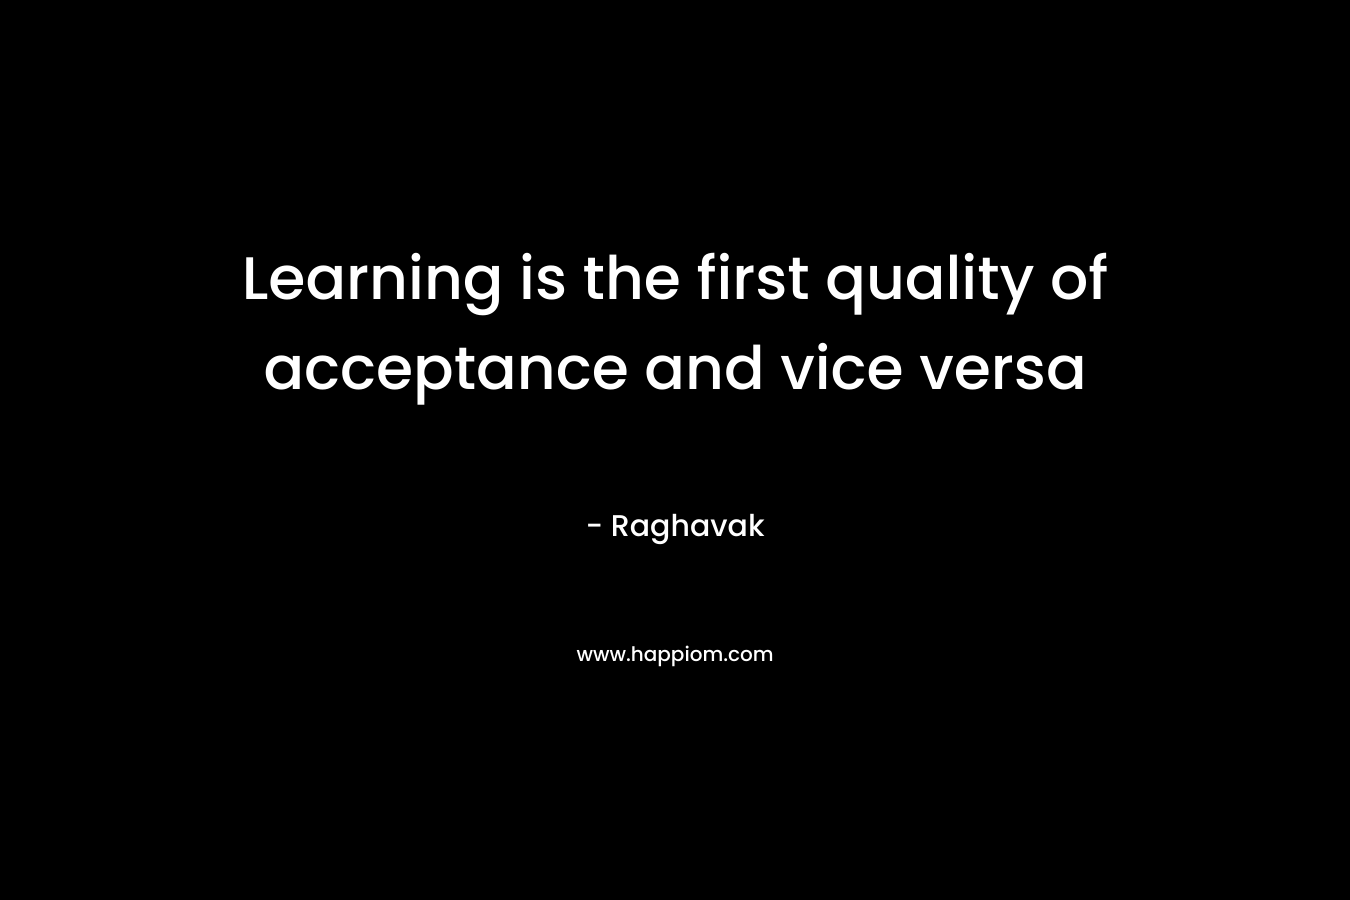 Learning is the first quality of acceptance and vice versa